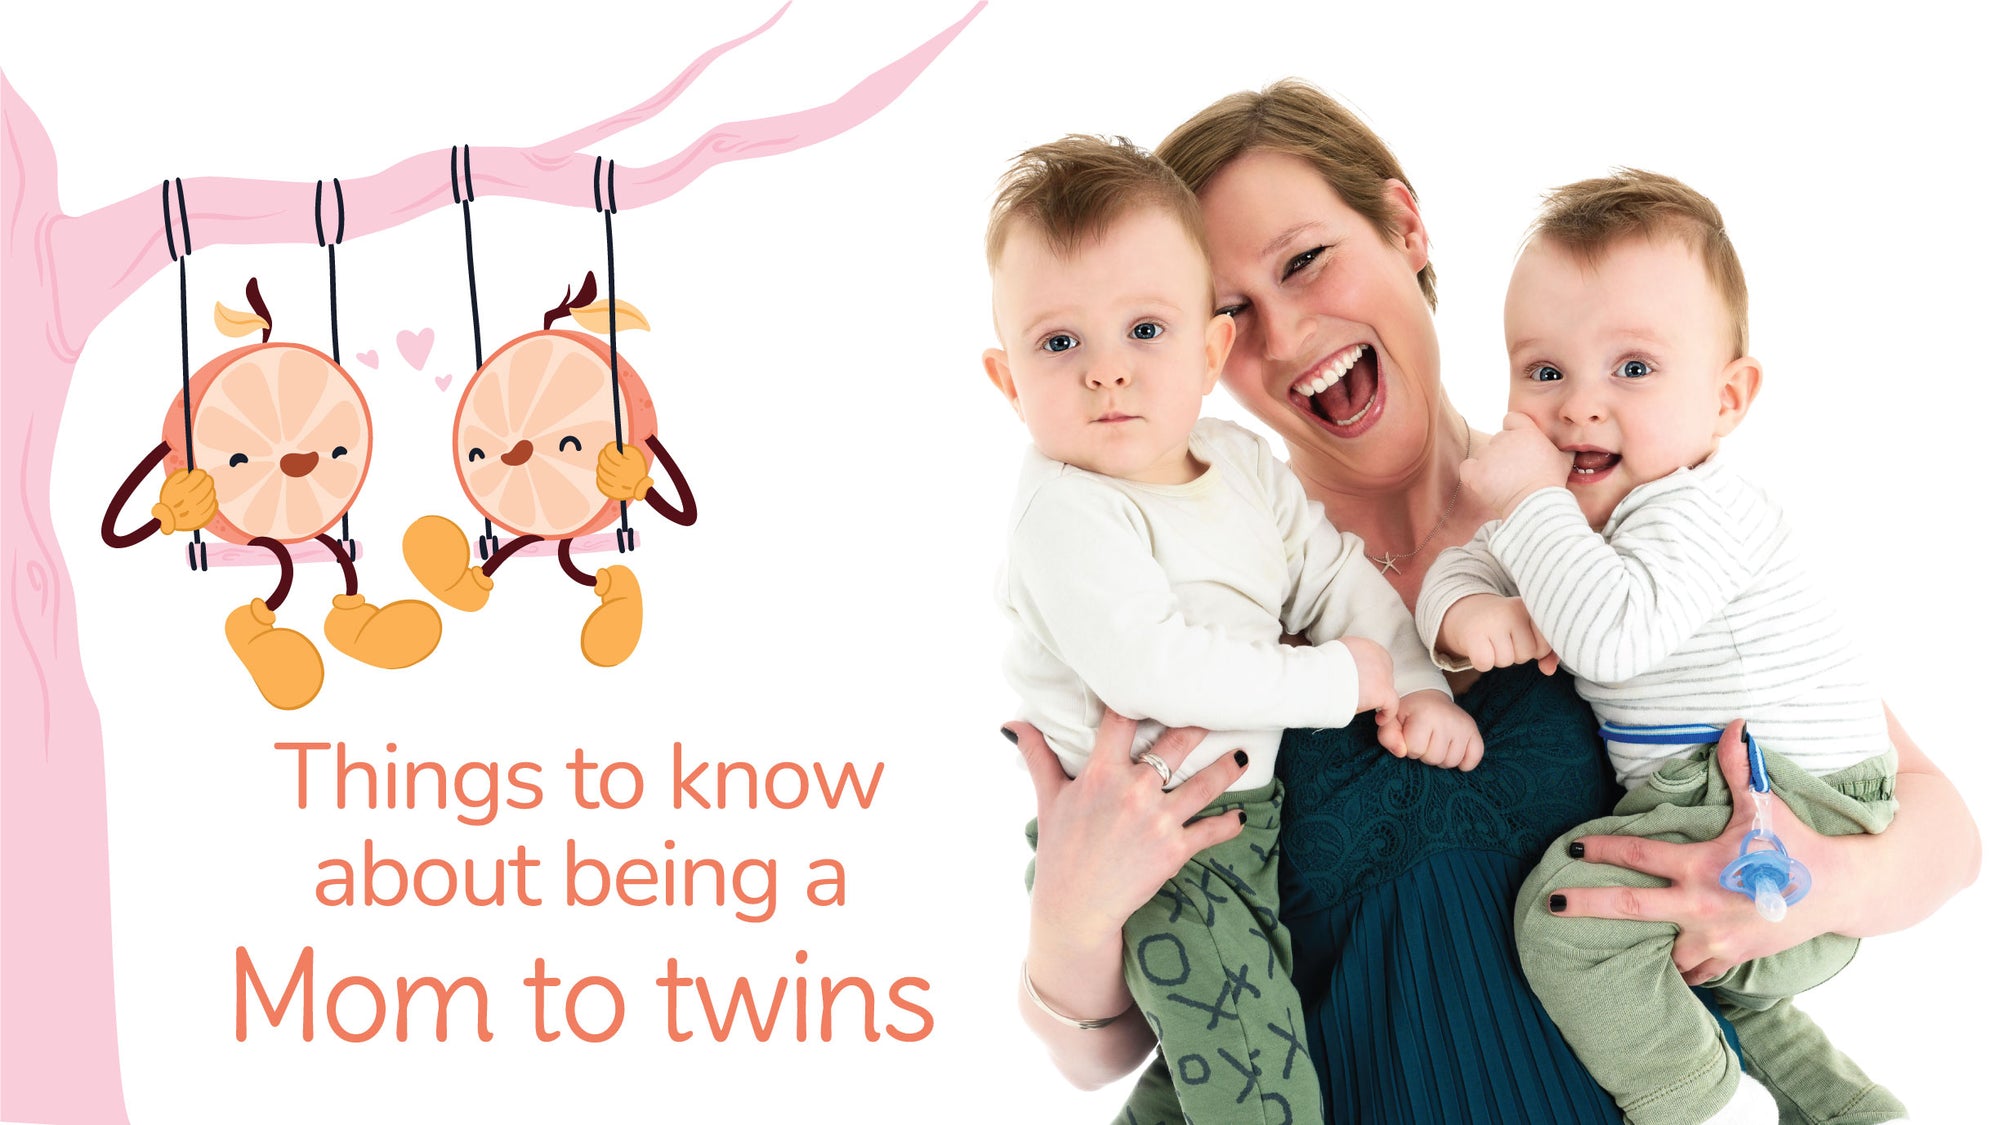 THINGS TO KNOW ABOUT BEING A MOM TO TWINS